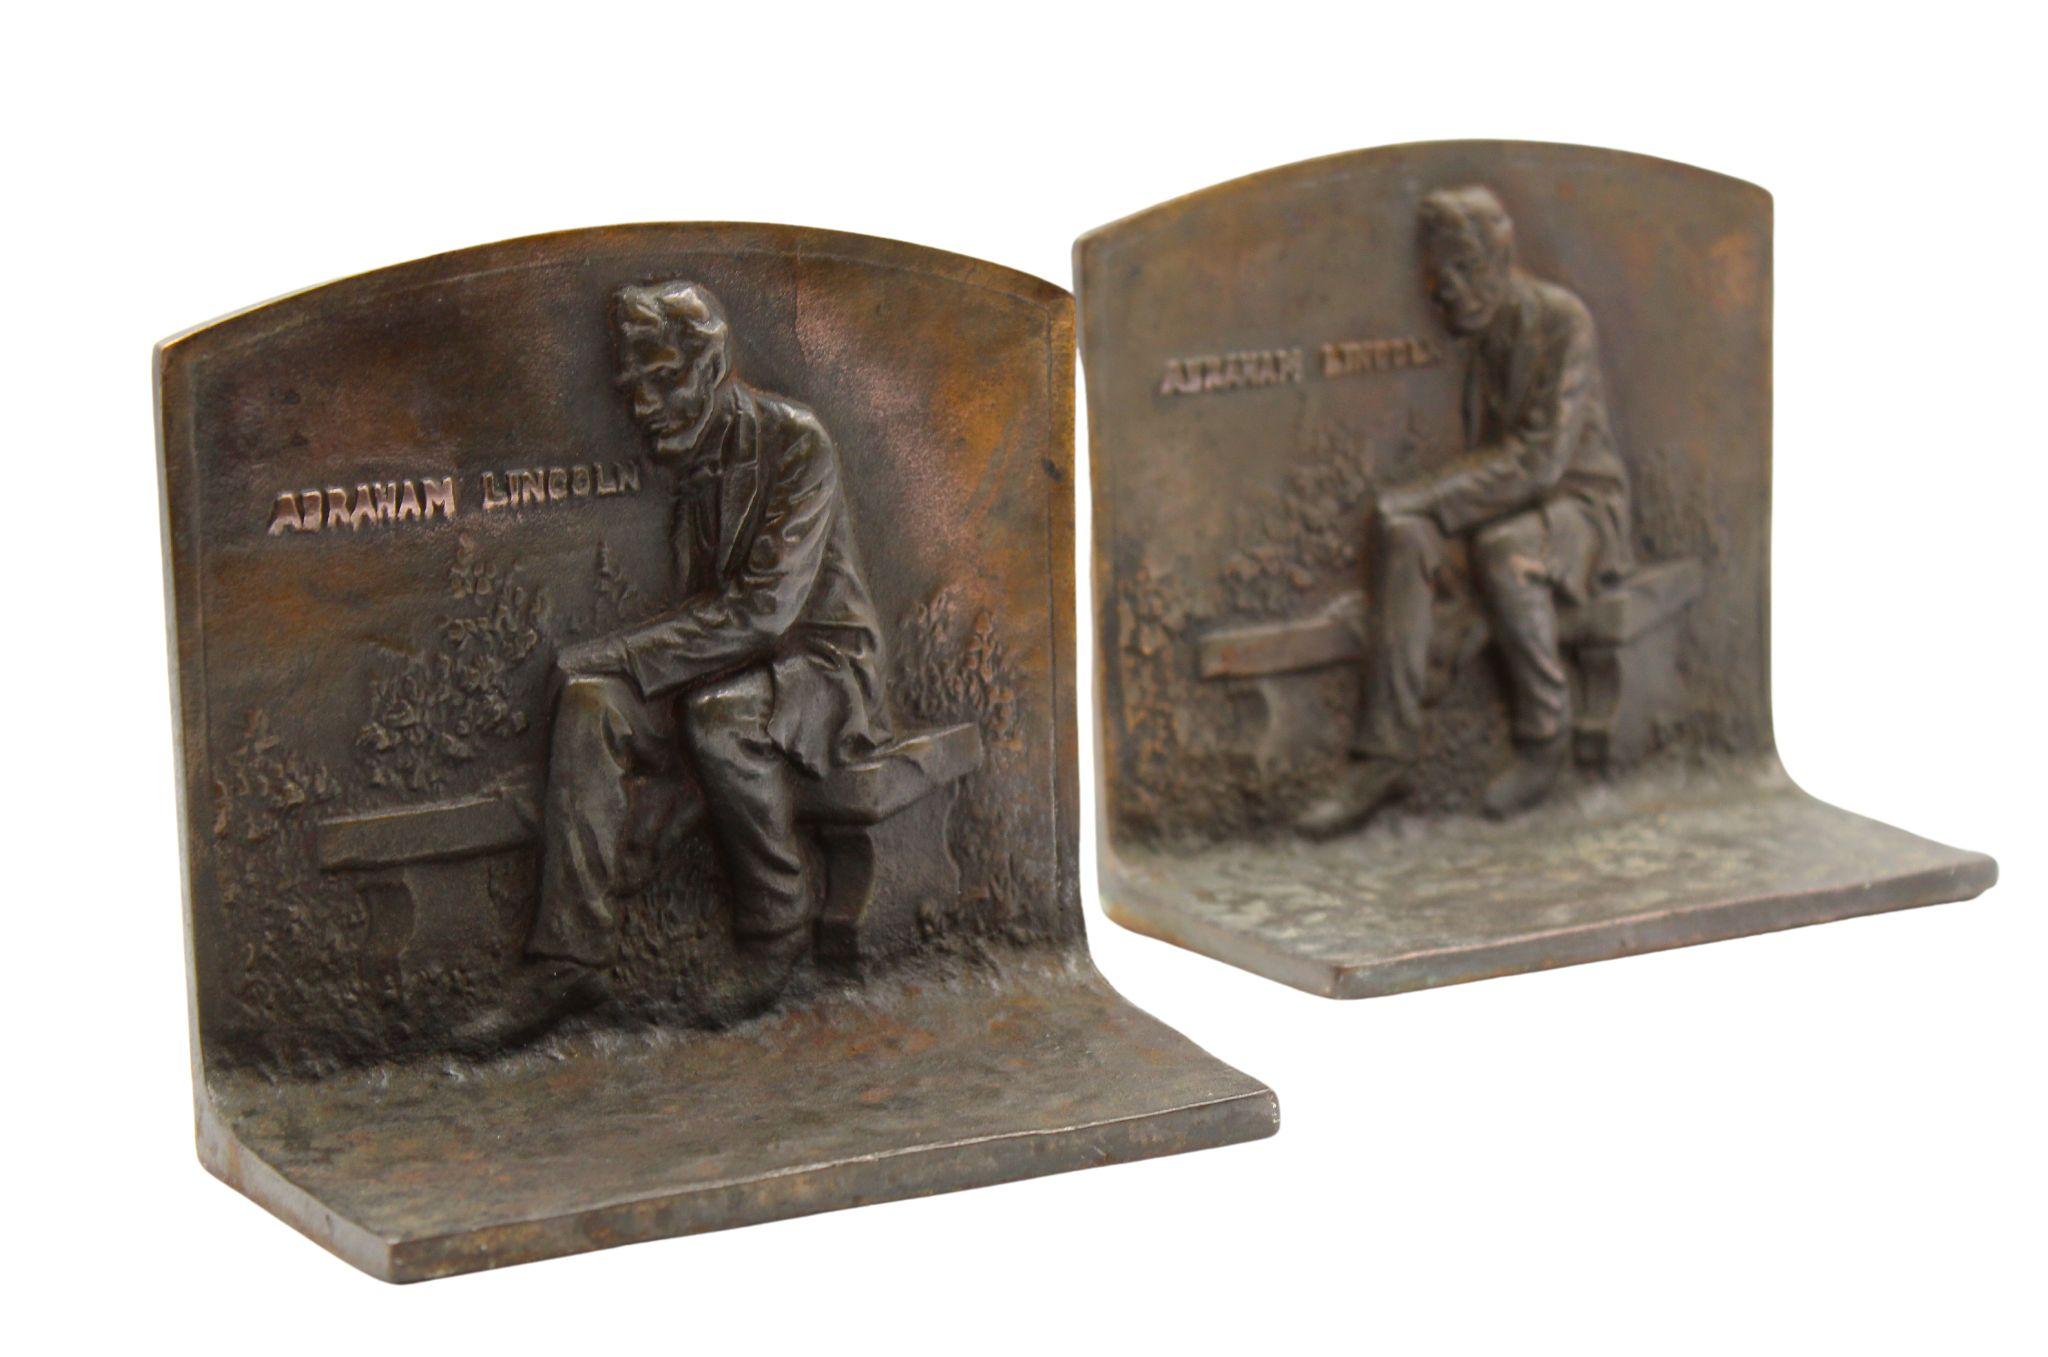 Presented is a pair of vintage bookends, featuring Abraham Lincoln seated on a bench. The scene is captured in raised relief on the front of the bookends, with the text “Abraham Lincoln” at upper left.

These bookends were modeled after the 1911